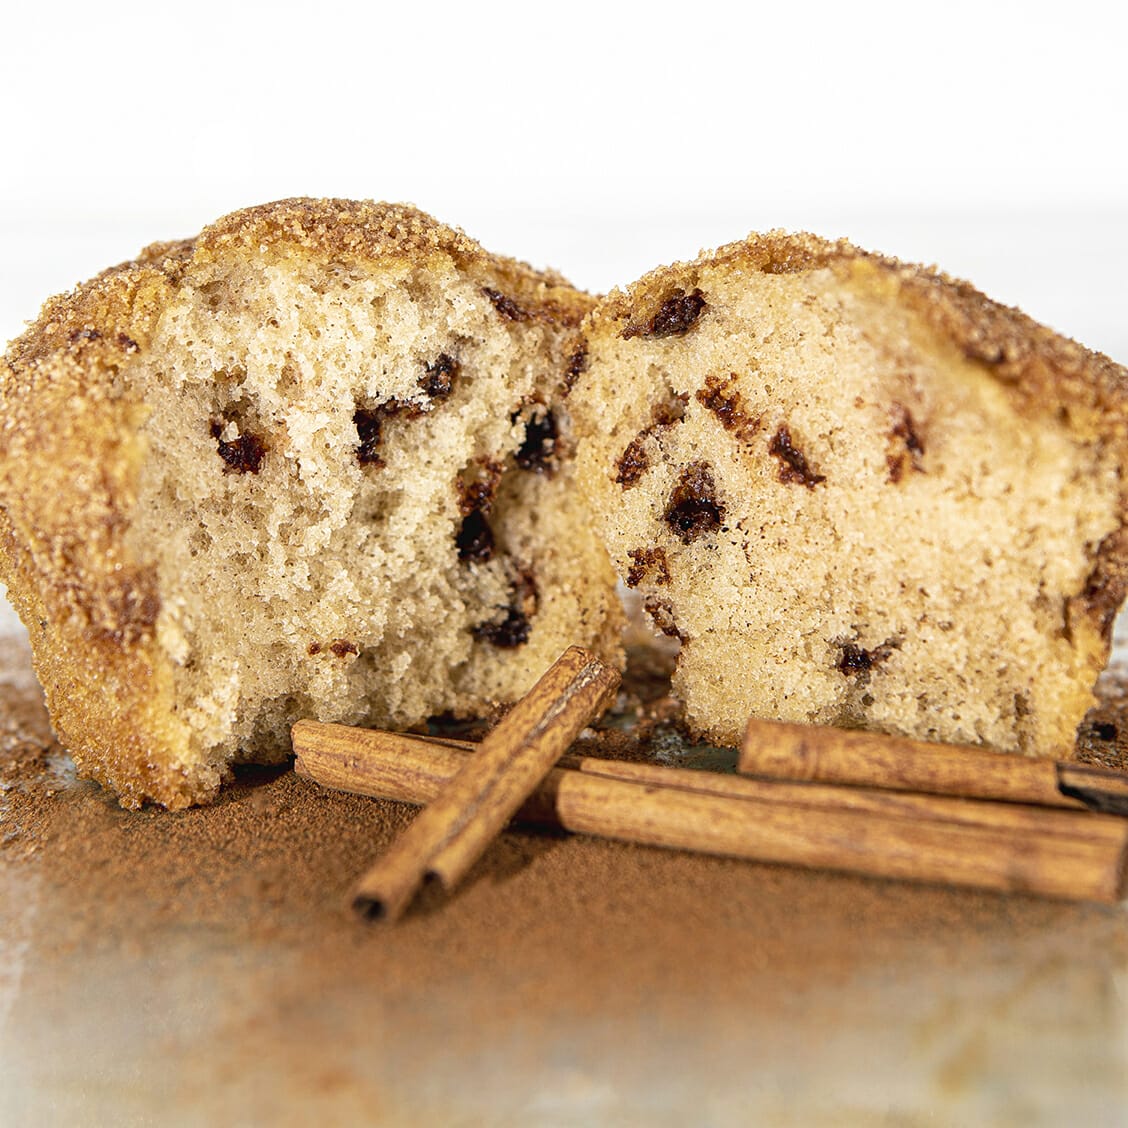 Cinnamon Chip gluten-free muffin broken open and surrounded by cinnamon sticks and cinnamon powder